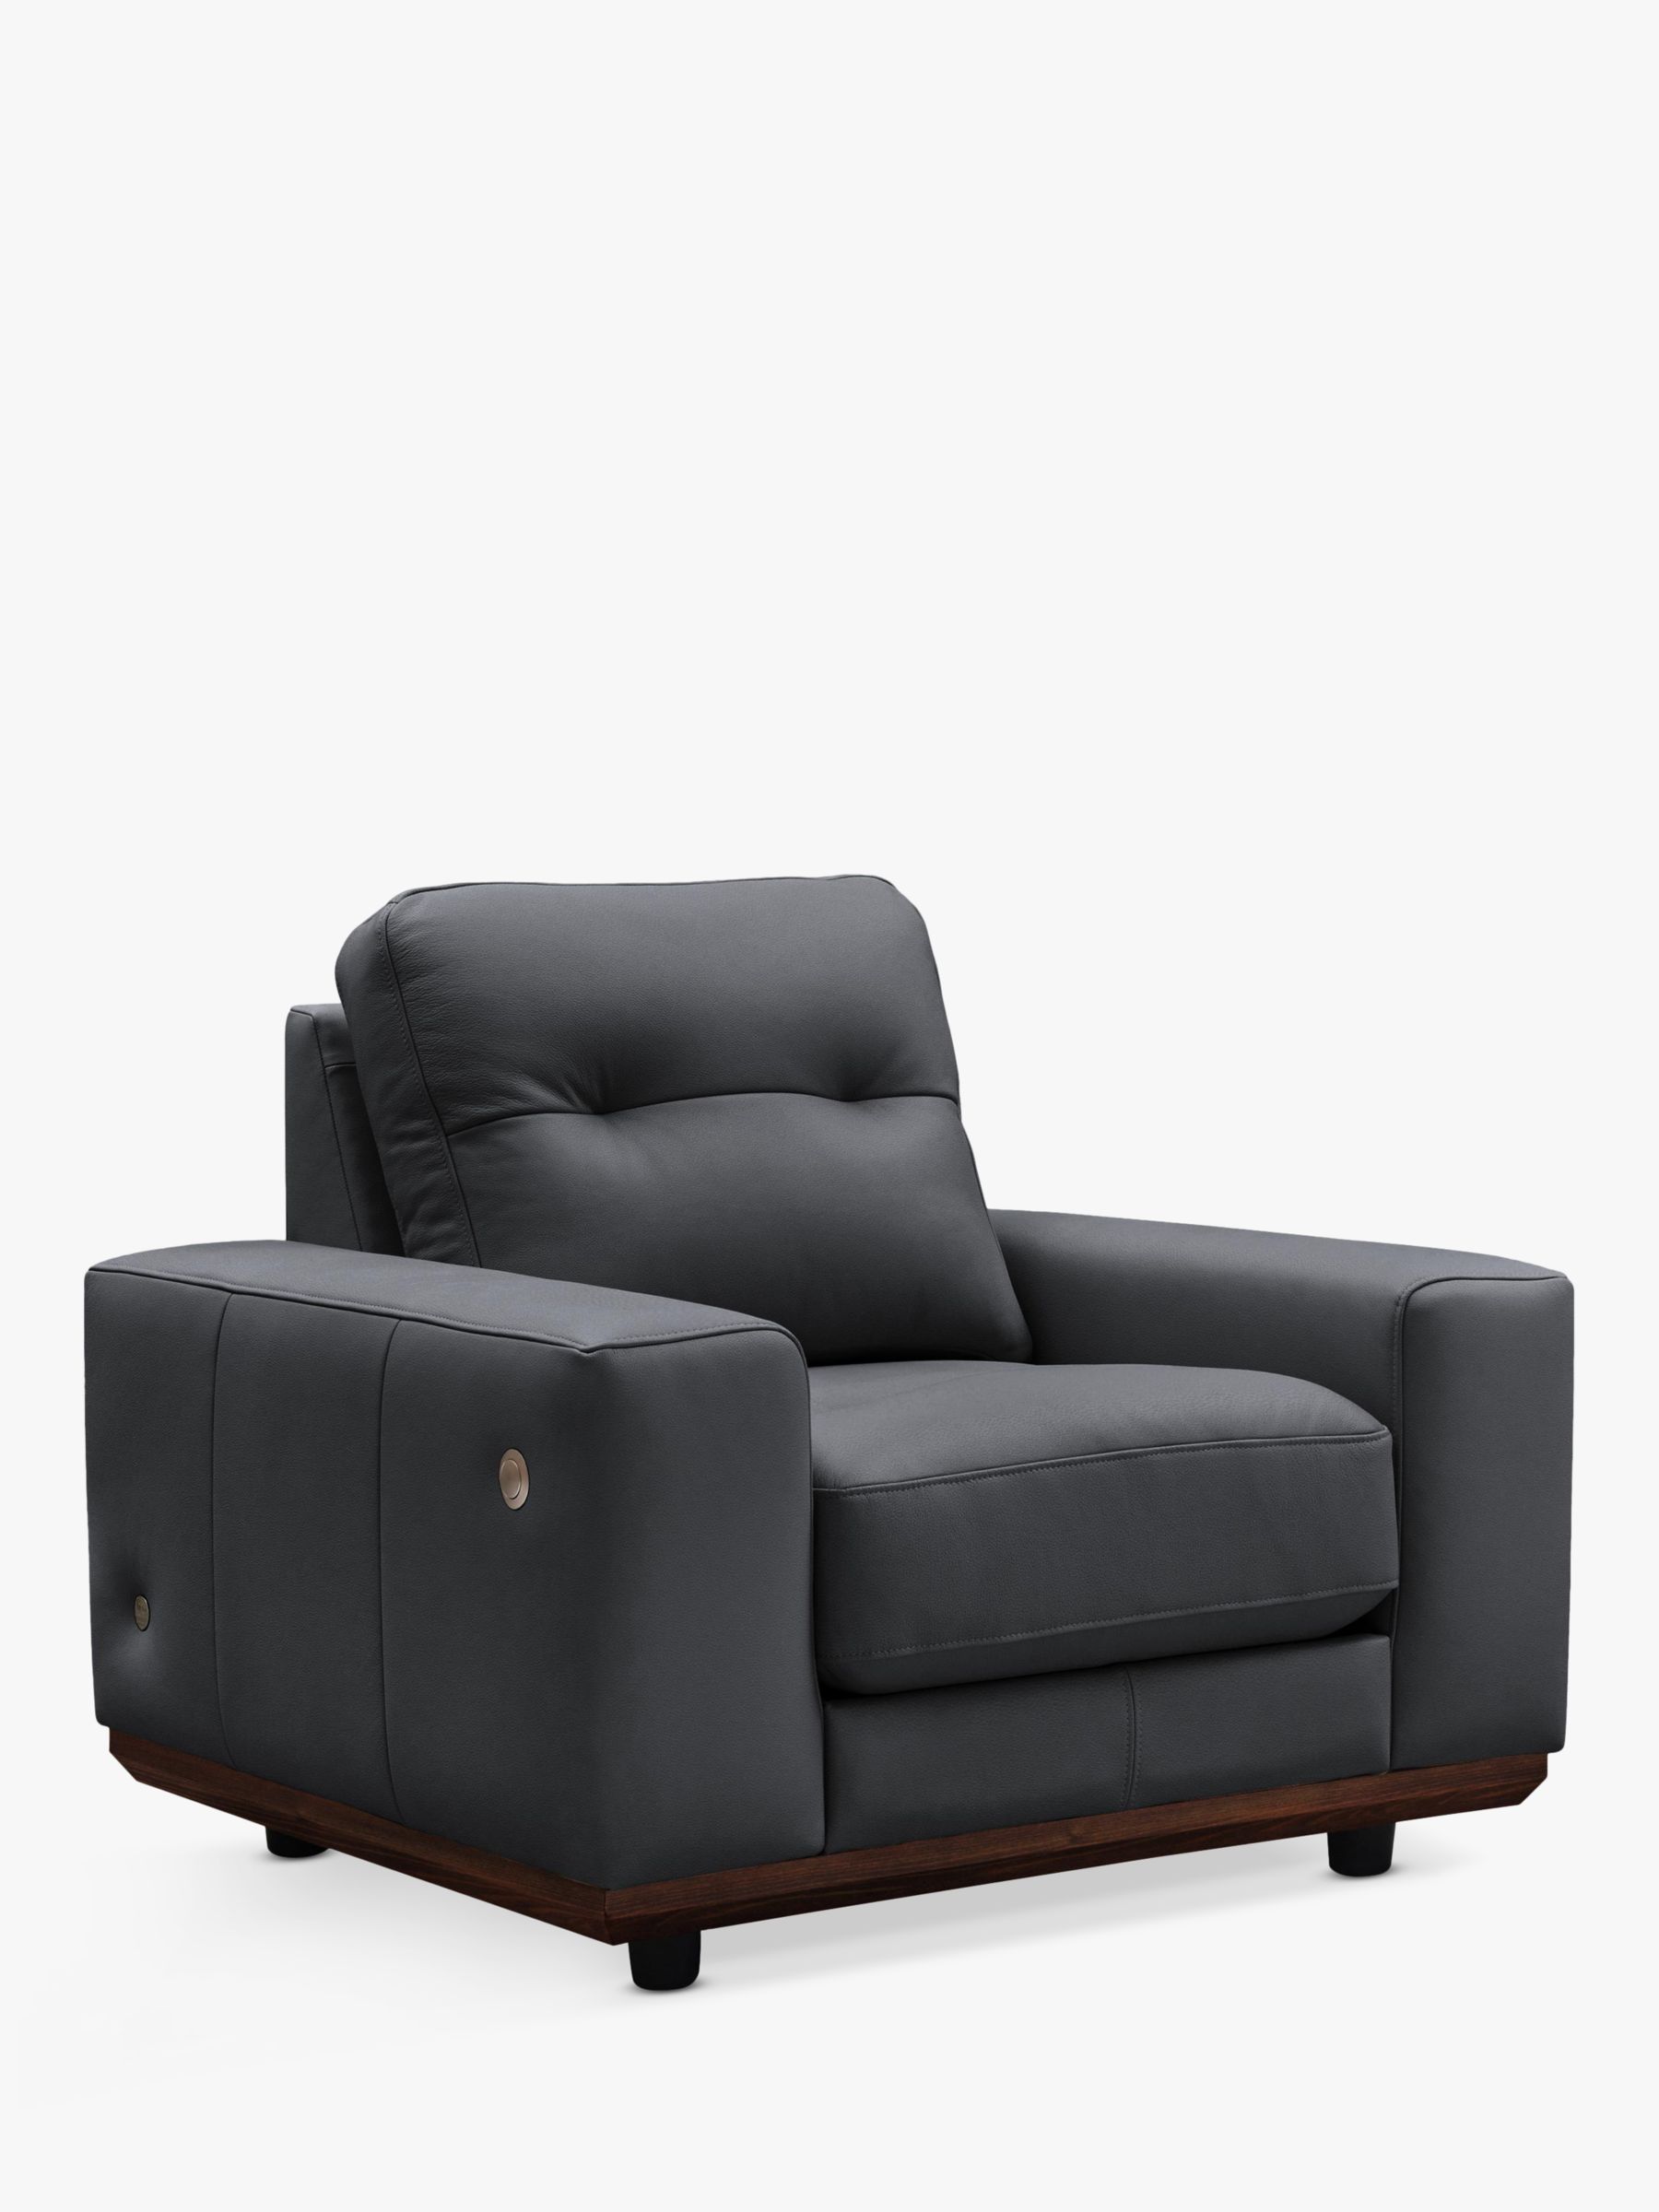 The Seventy One Range, G Plan Vintage The Seventy One with USB Charging Port Leather Armchair, Cambridge Petrol Blue